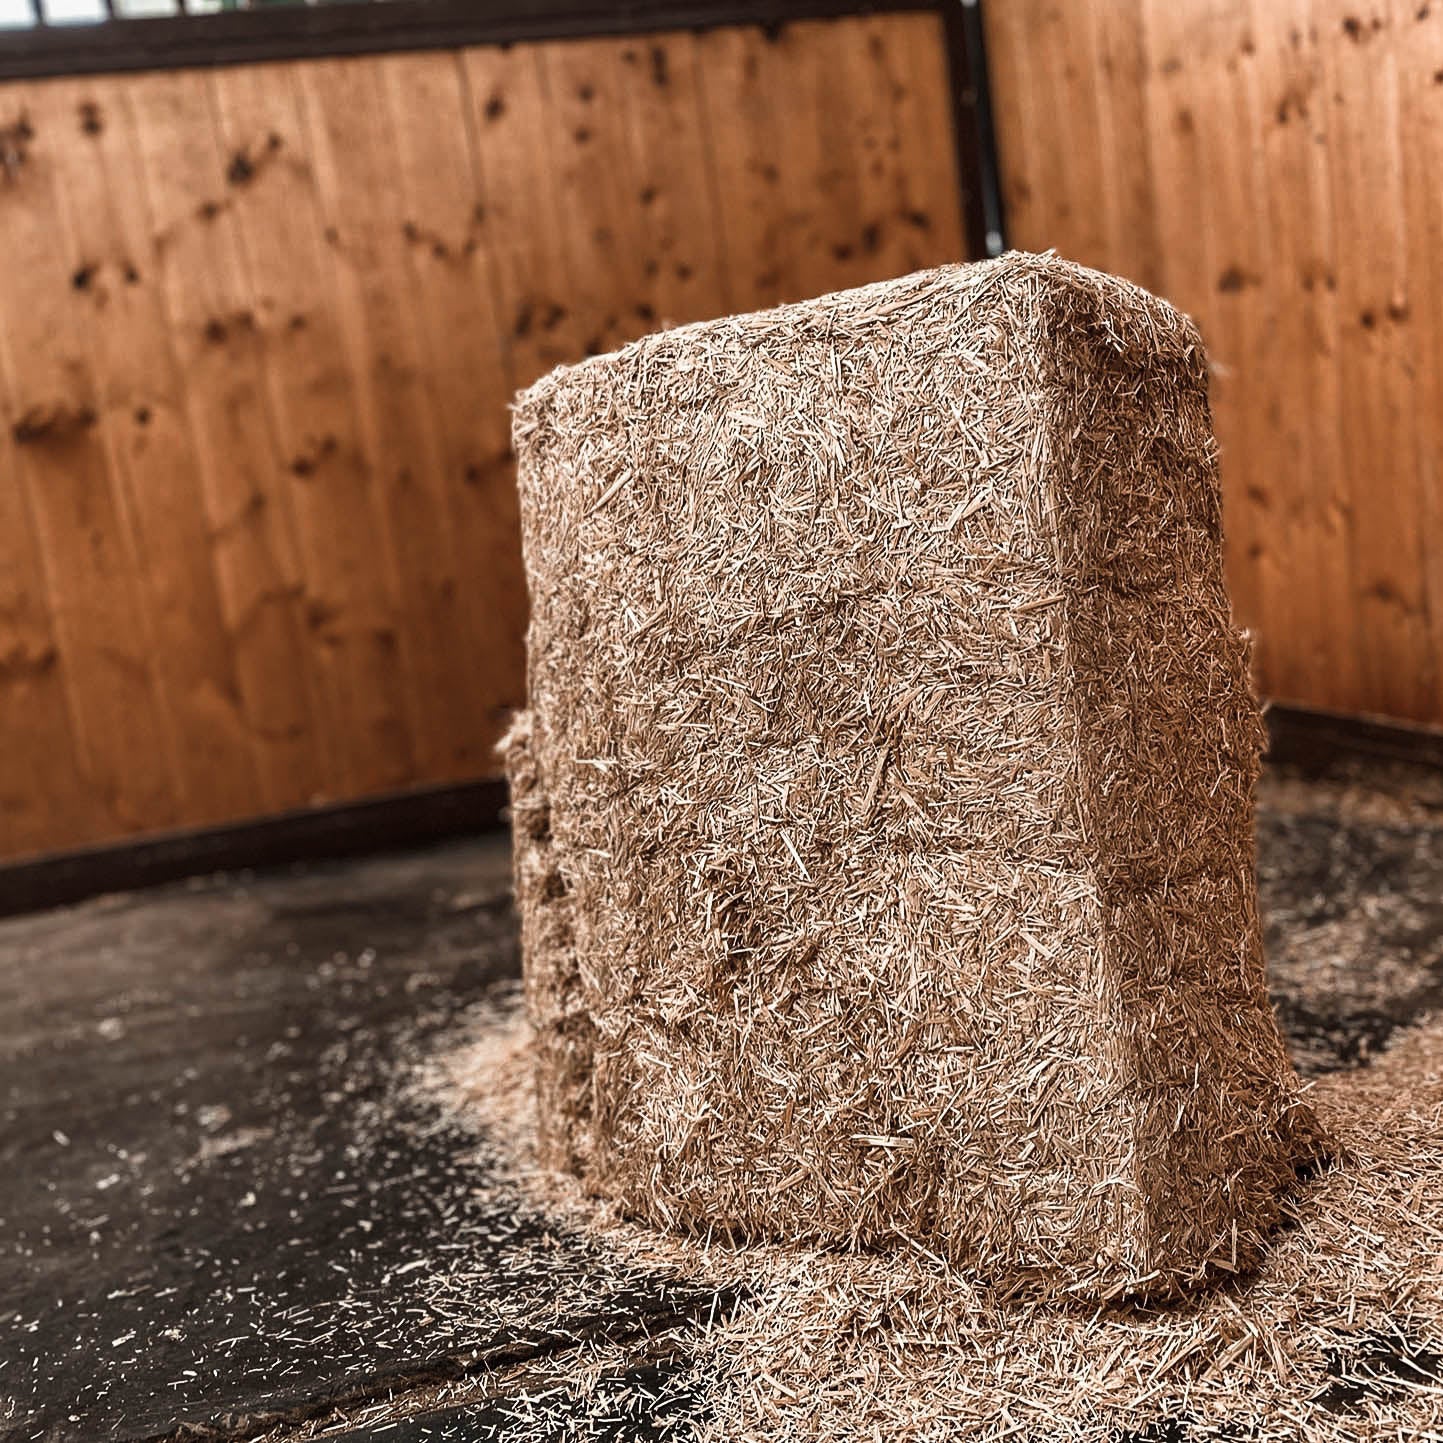 Hay, Straw, Wood Shavings for Bedding - Wardle Feed & Pet Supply